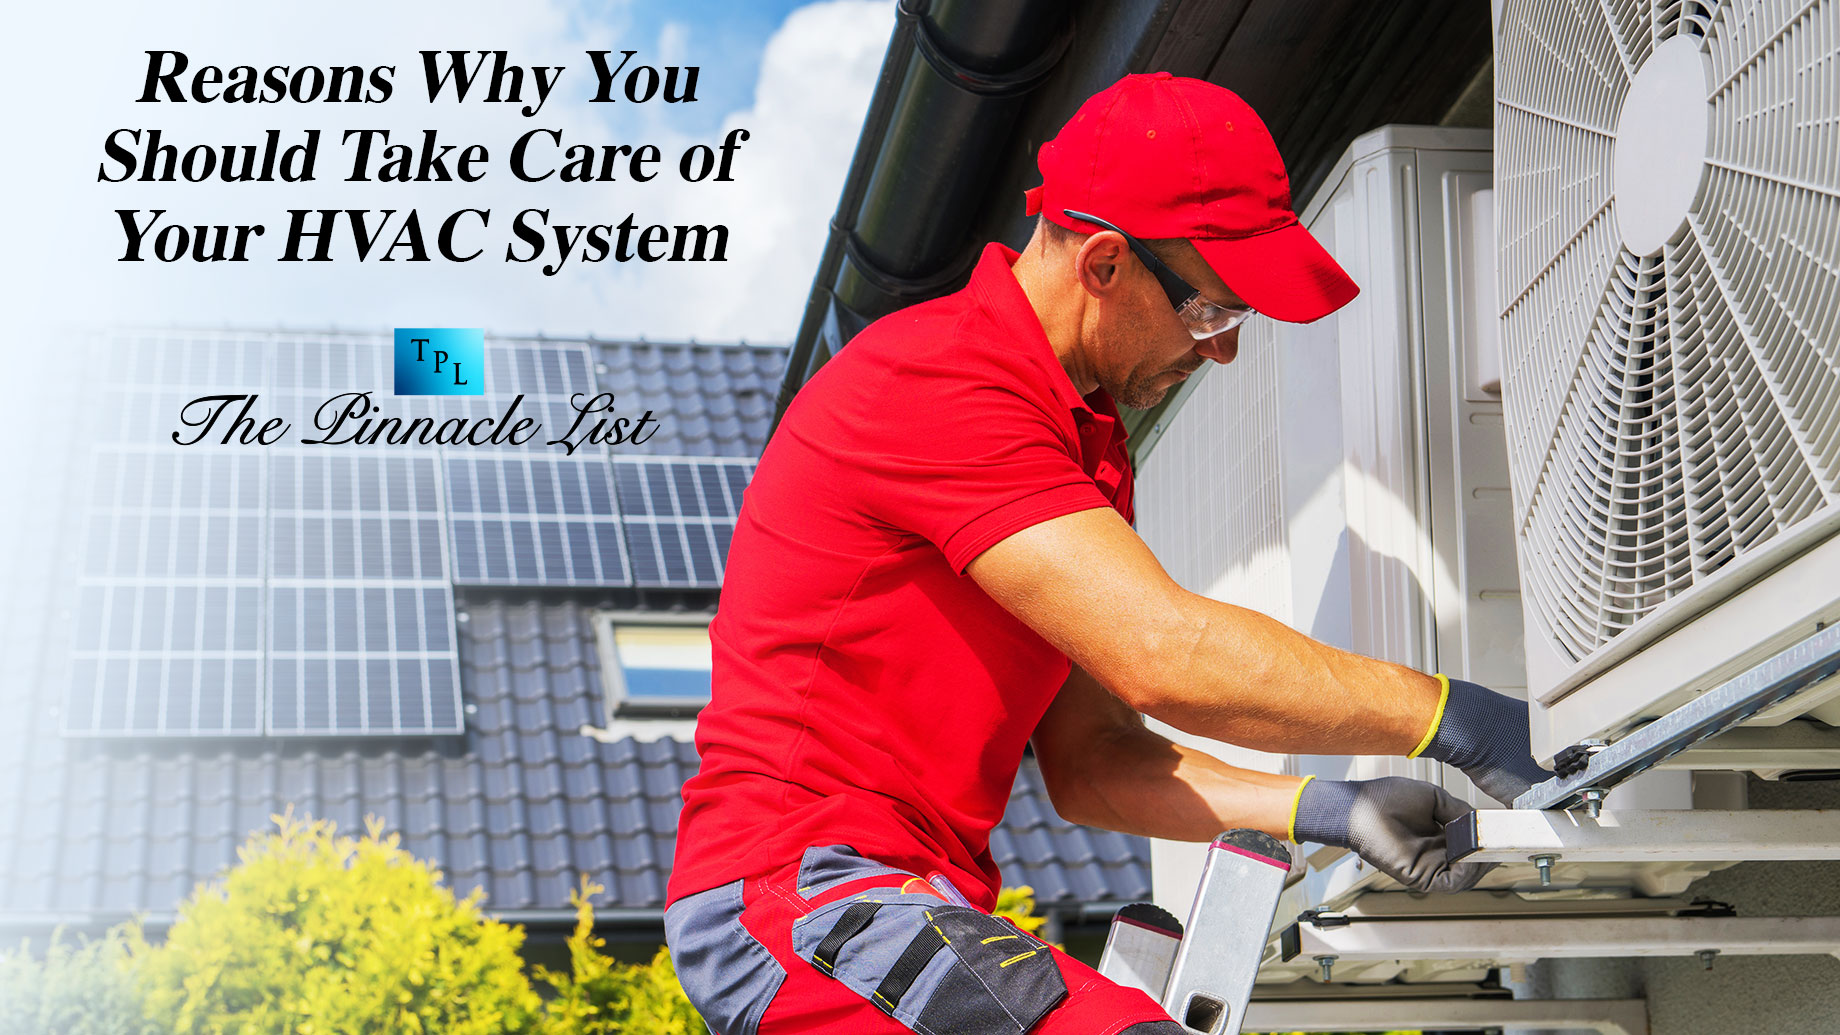 Reasons Why You Should Take Care of Your HVAC System